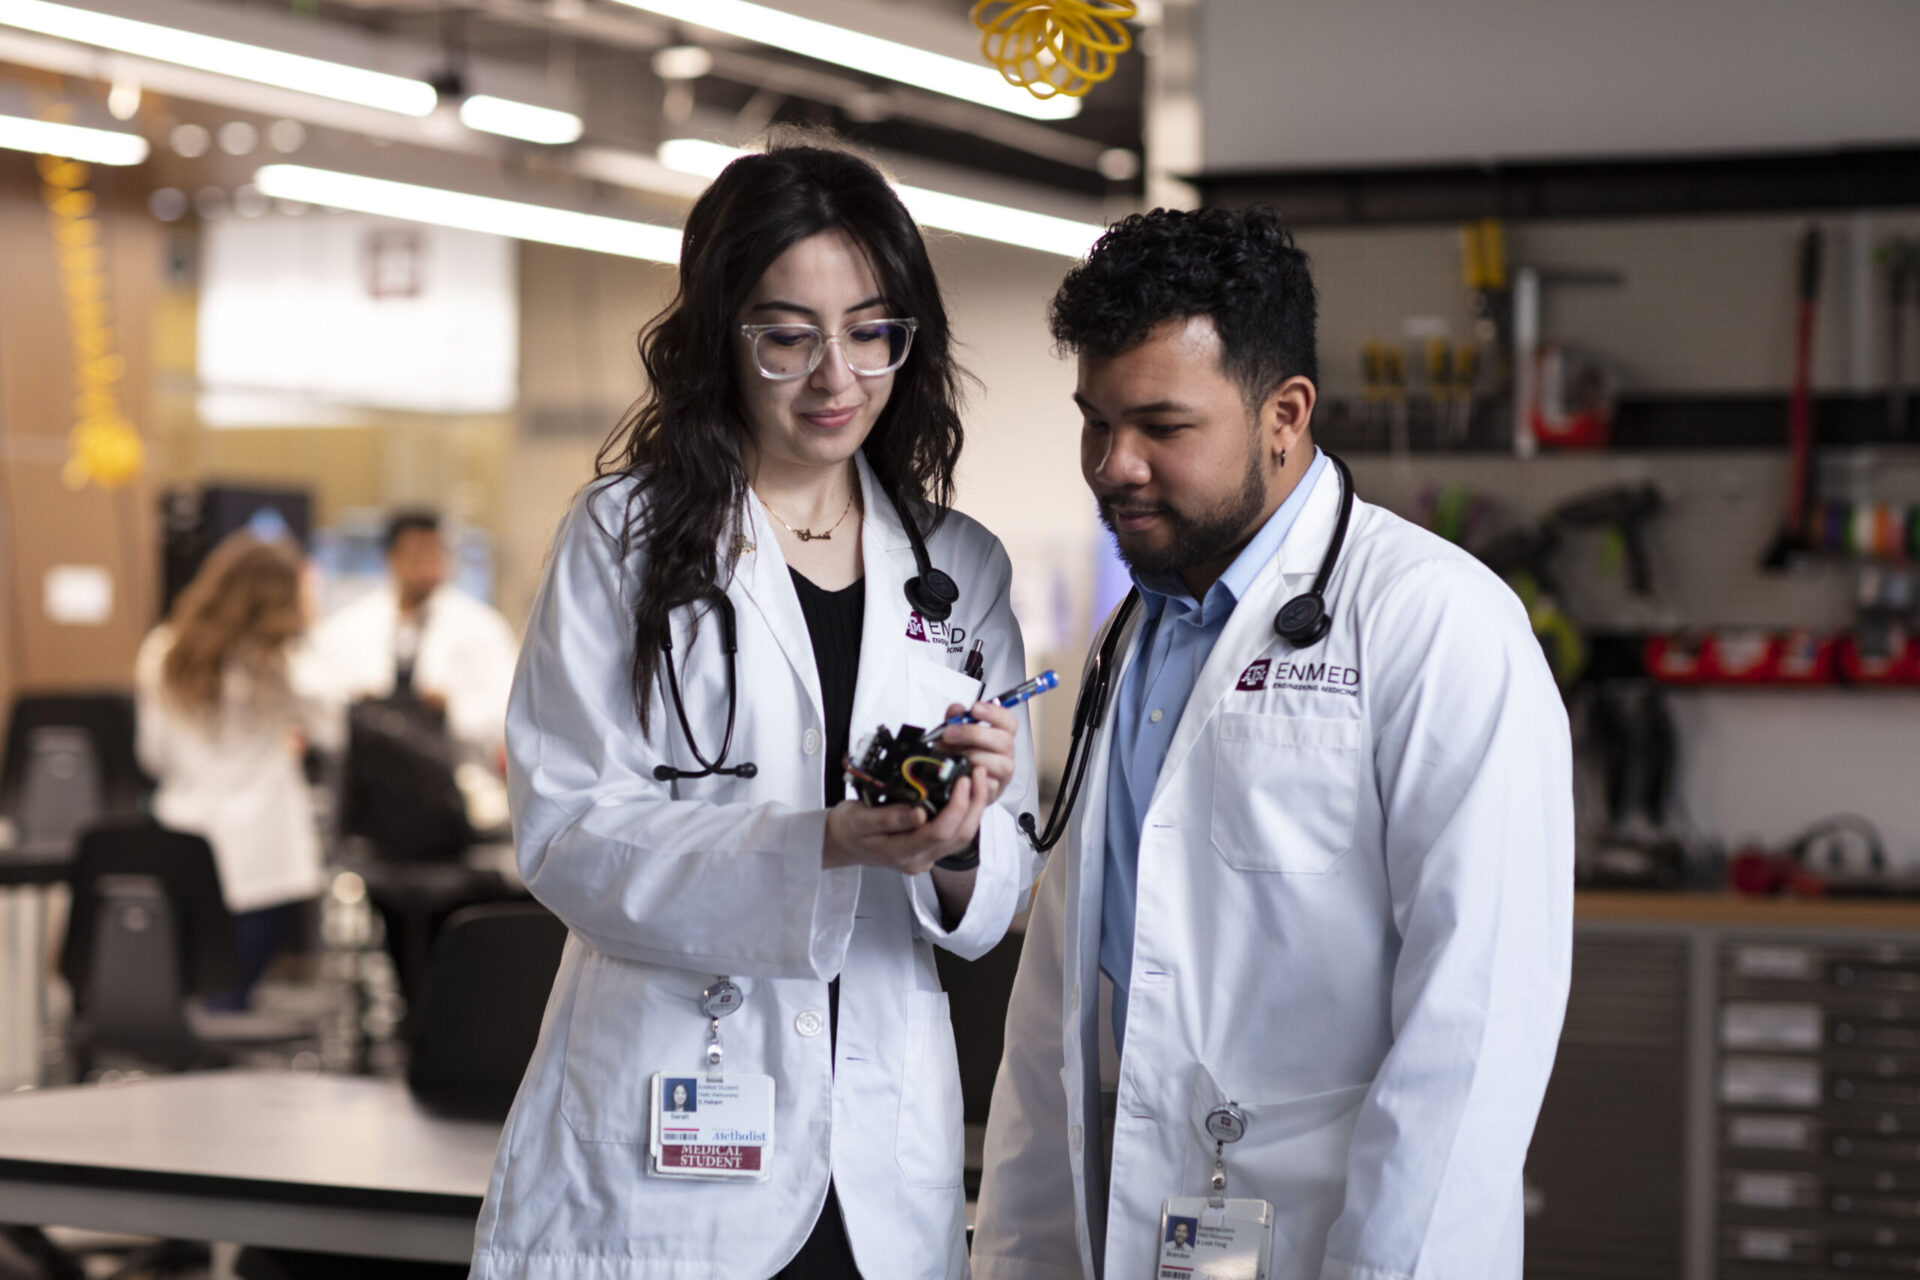 Texas A&M University School Of Engineering Medicine (EnMed),Photos Of Students For Marketing Uses.